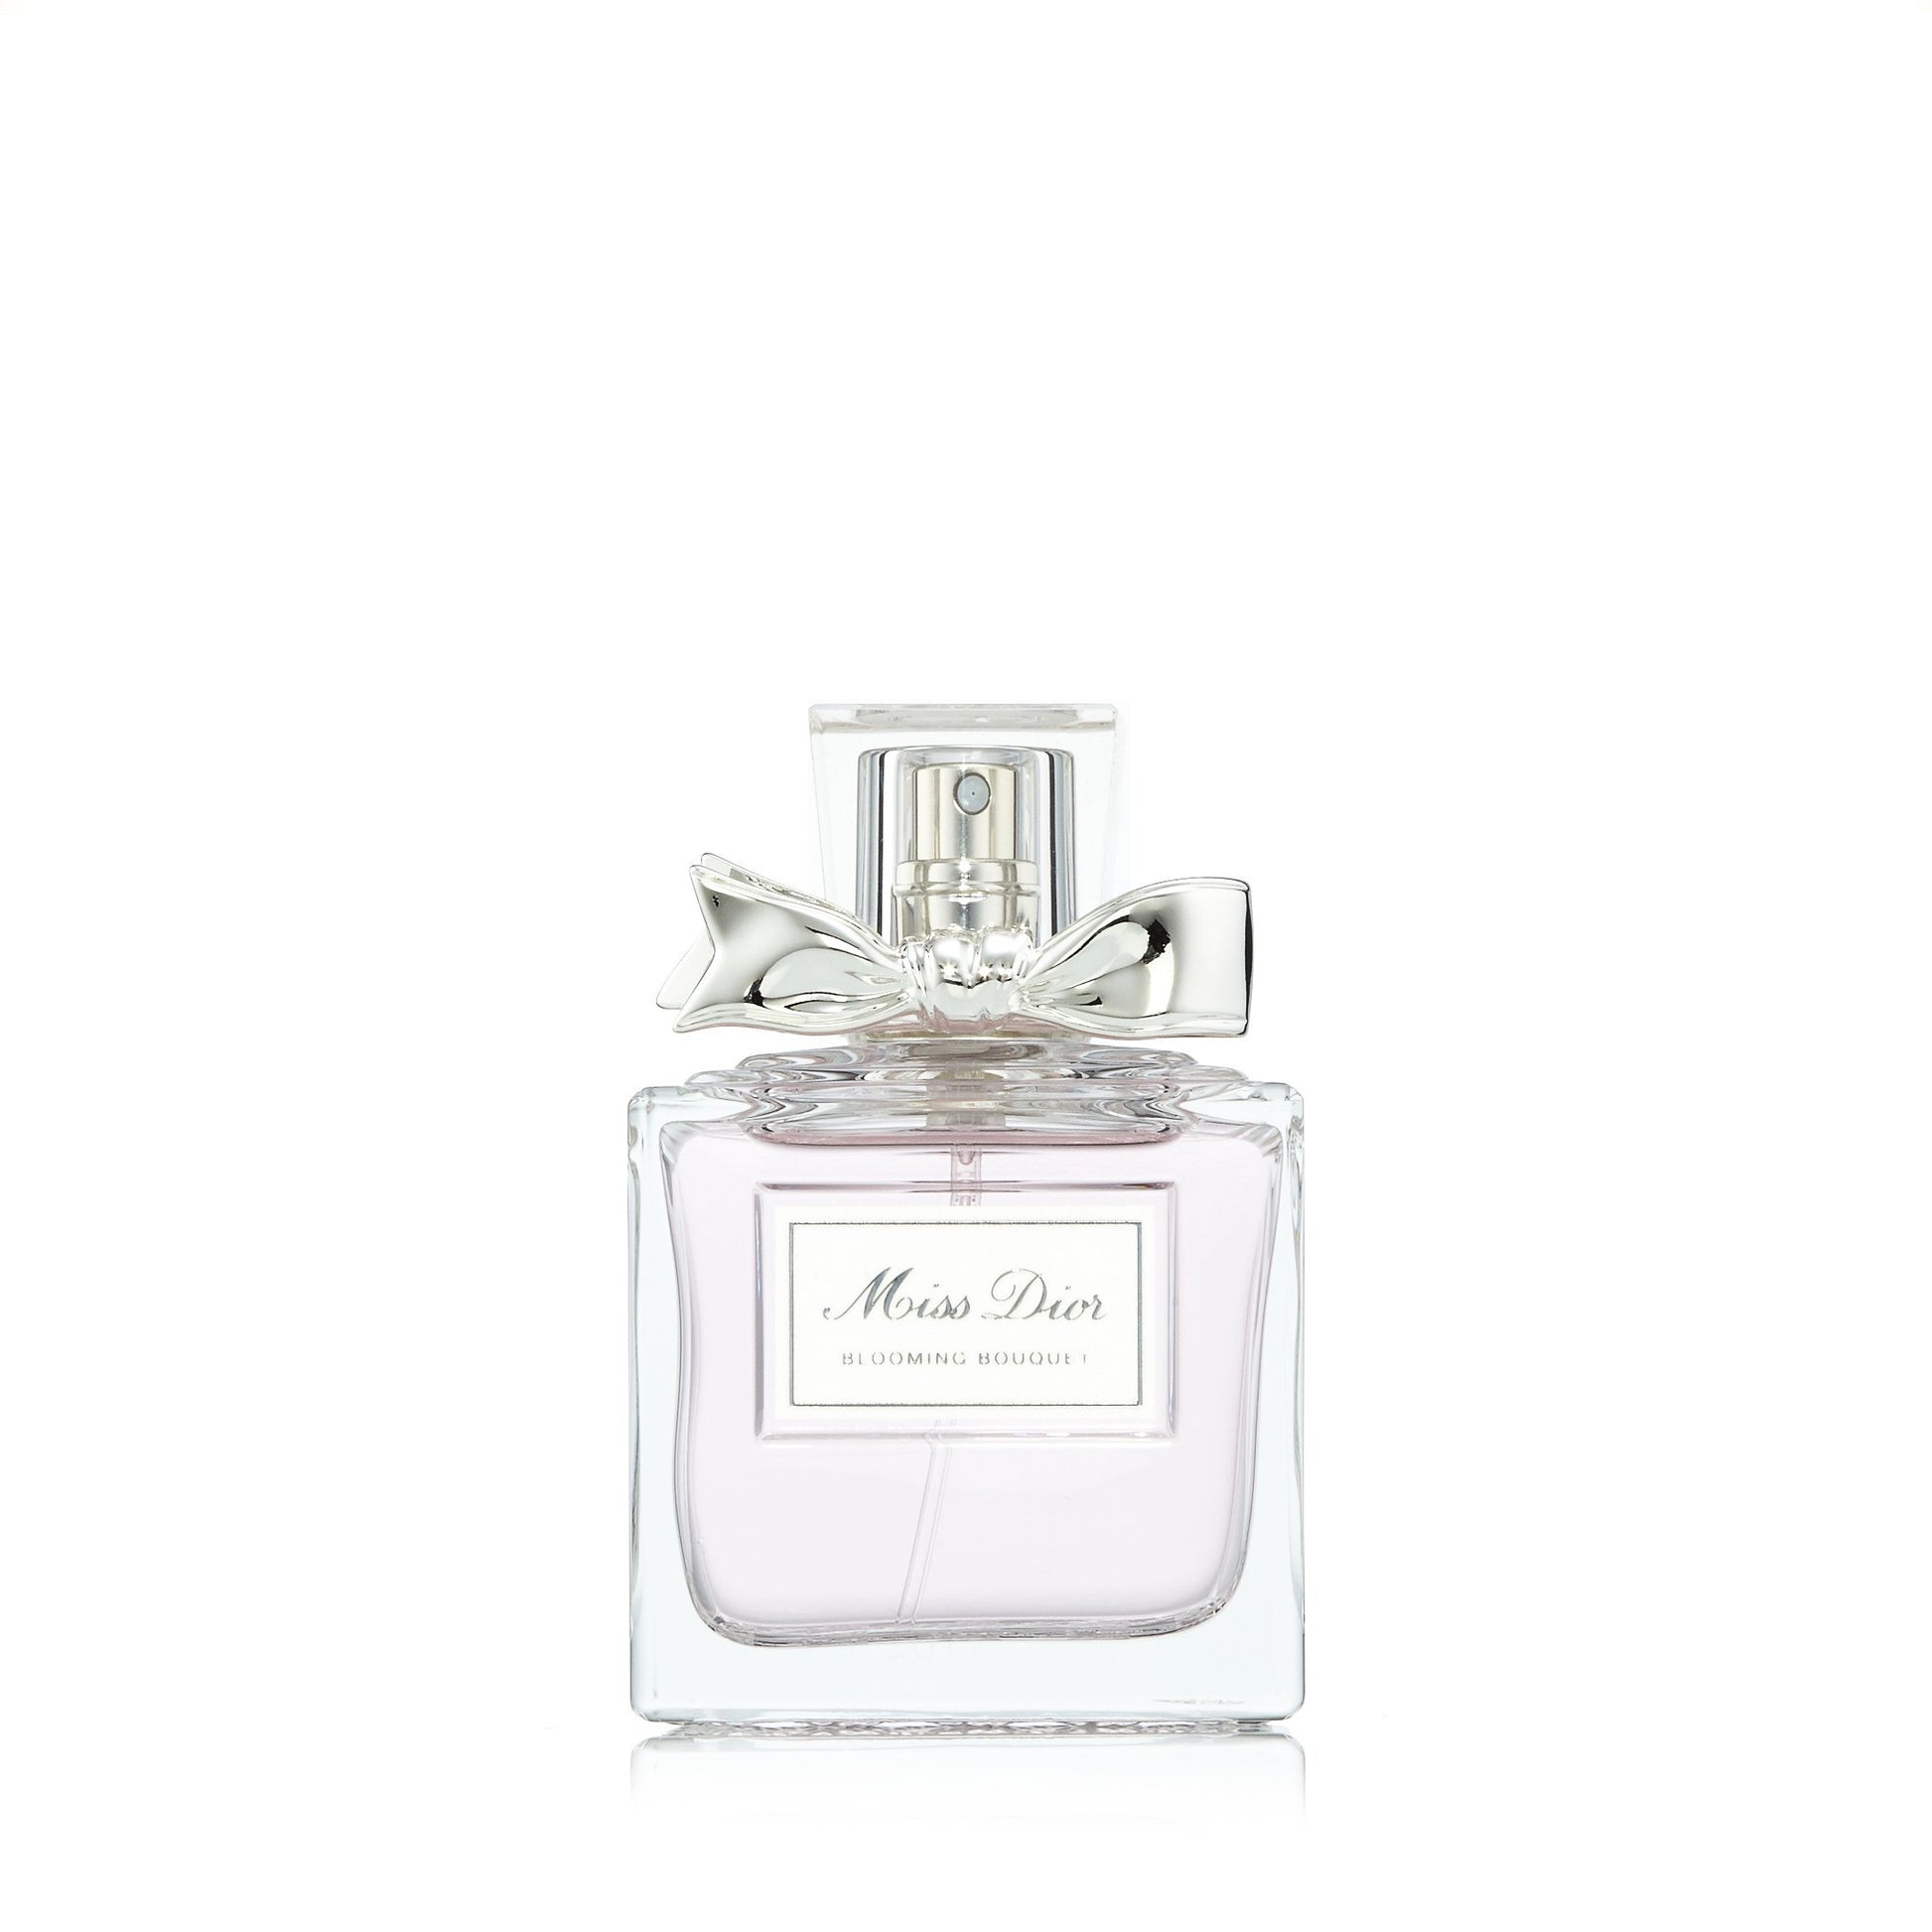 Miss Dior Blooming Bouquet Eau de Toilette Spray for Women by Dior 1.7 oz. Click to open in modal